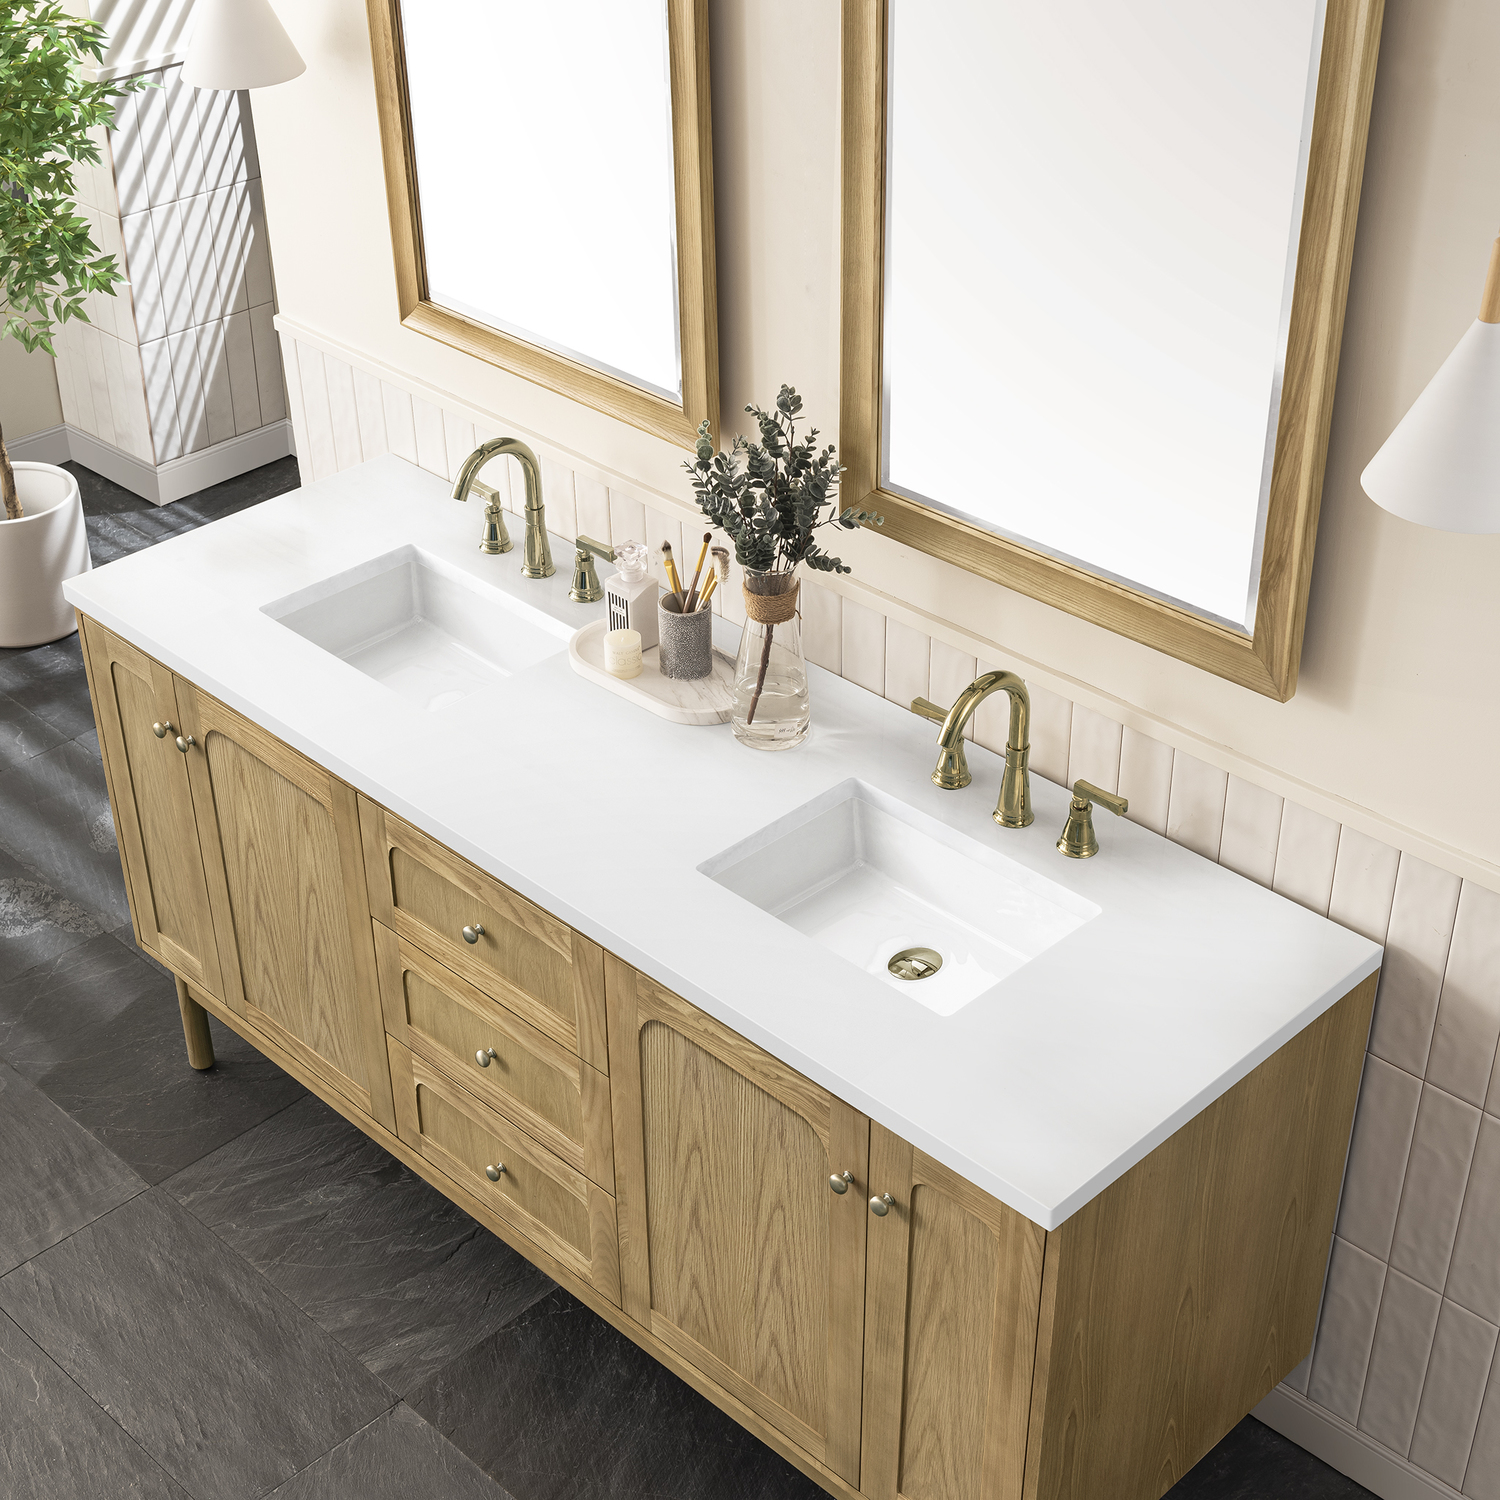 40 bathroom vanity with top and sink James Martin Vanity Light Natural Oak Boho, Contemporary/Modern